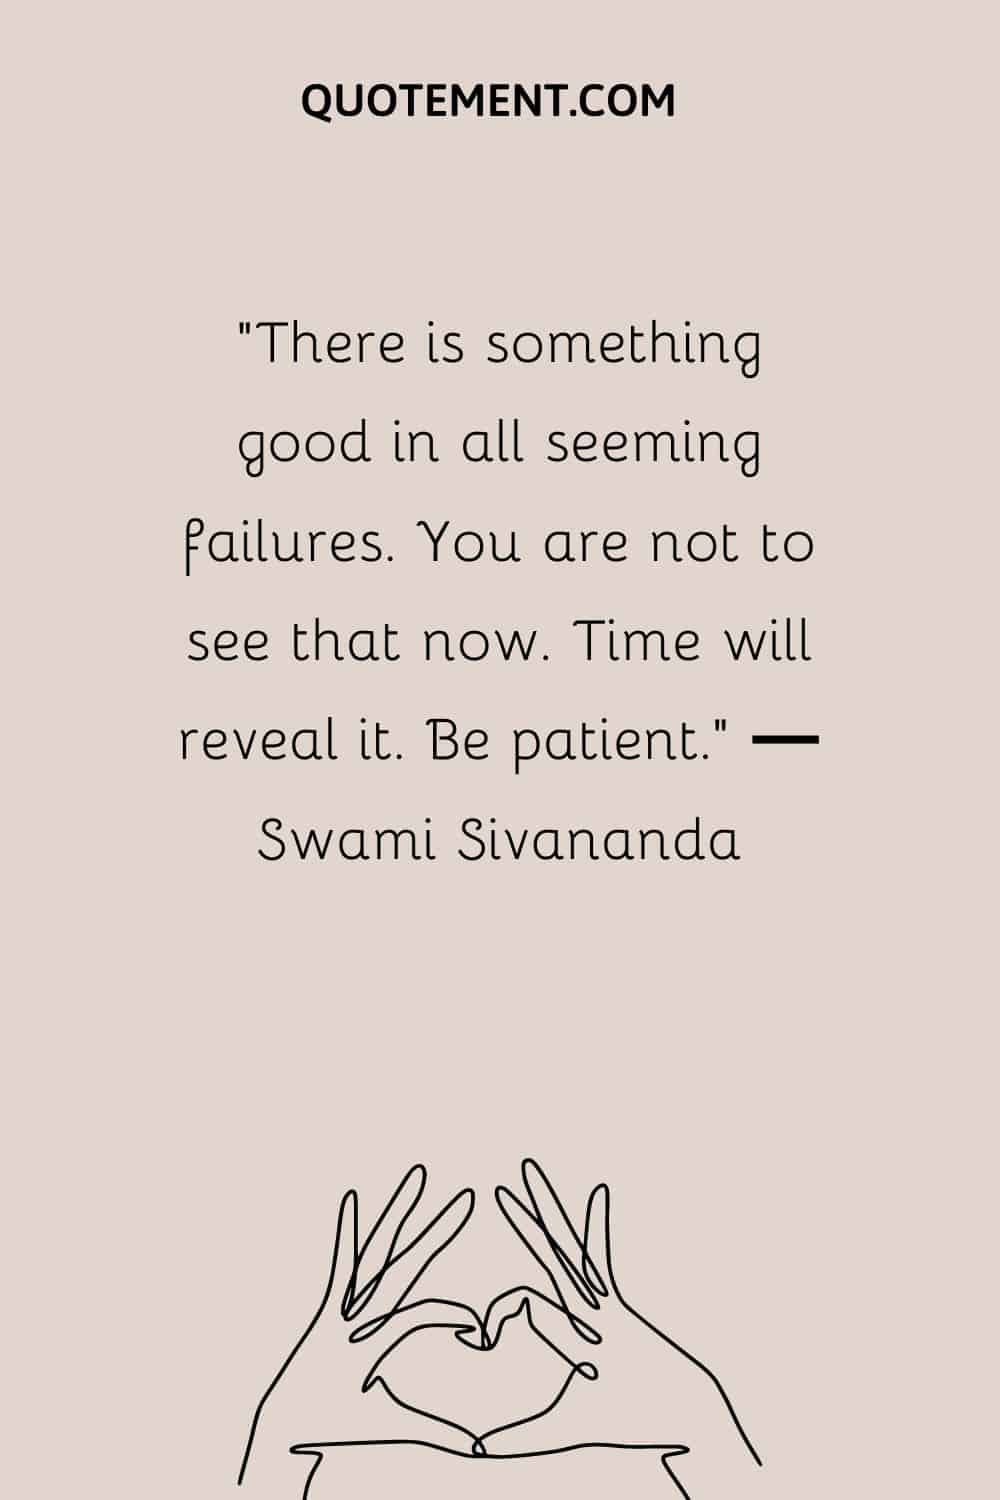 “There is something good in all seeming failures. You are not to see that now. Time will reveal it. Be patient.” ― Swami Sivananda